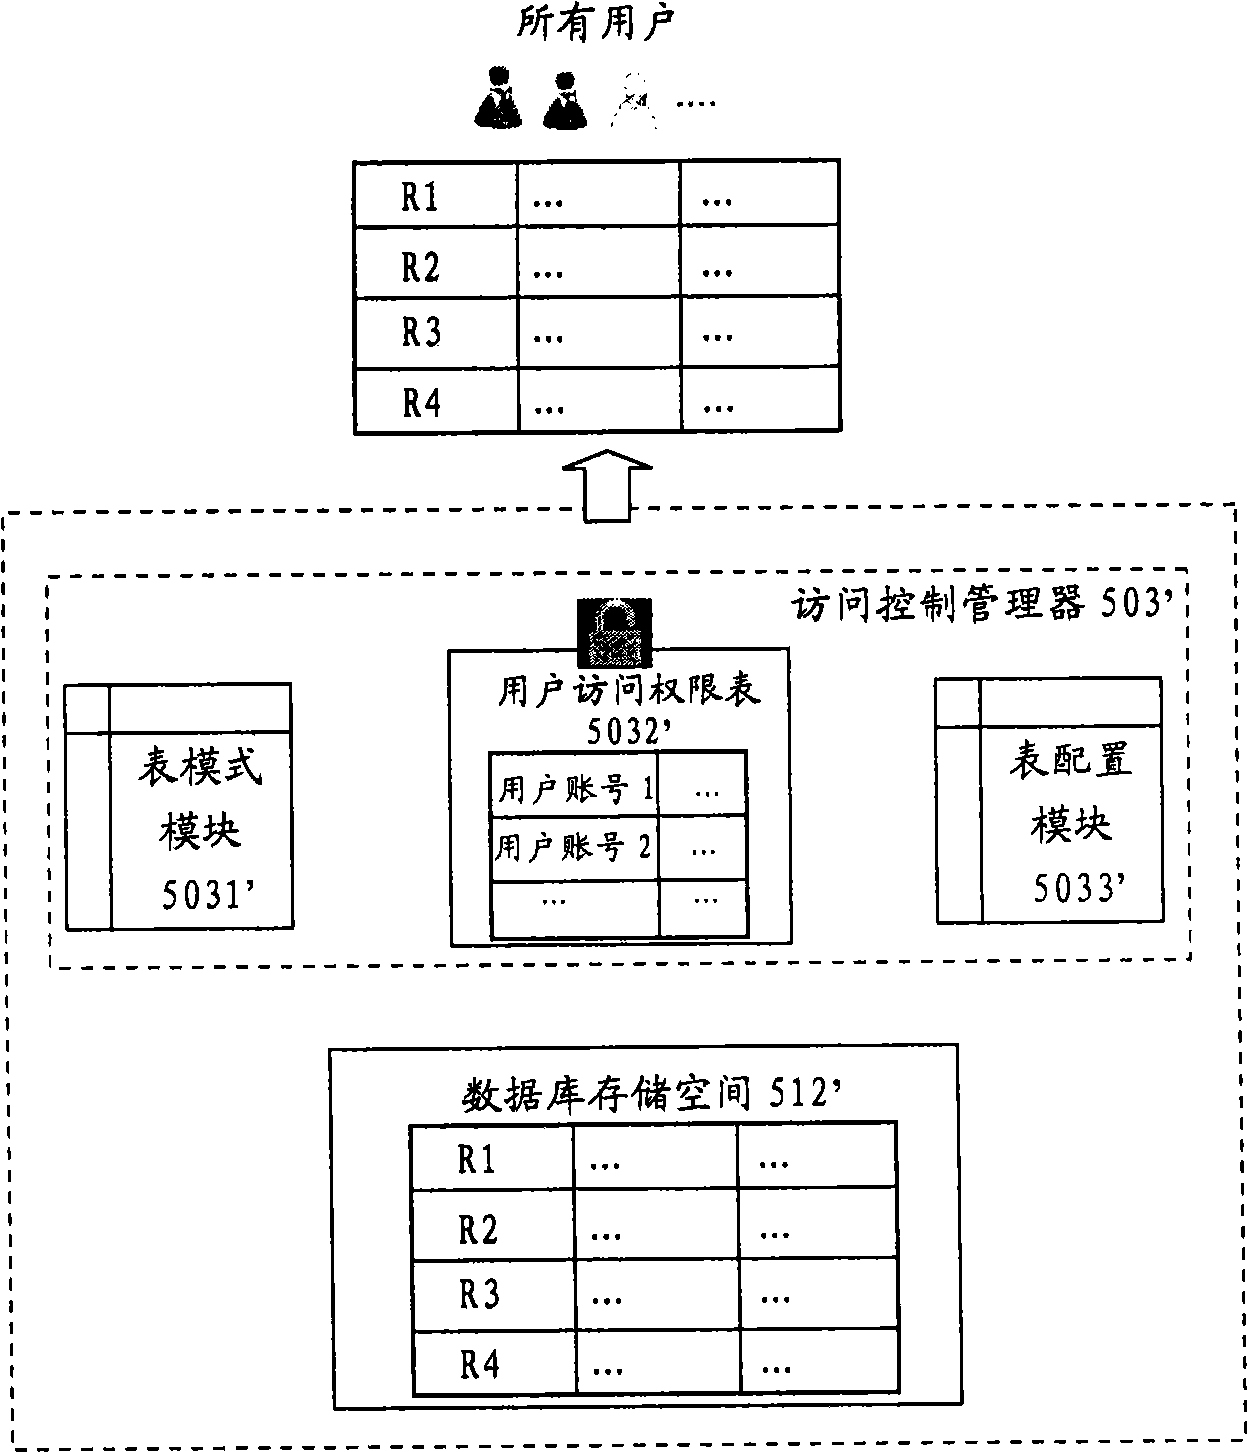 Multi-tenant oriented database engine and its data access method